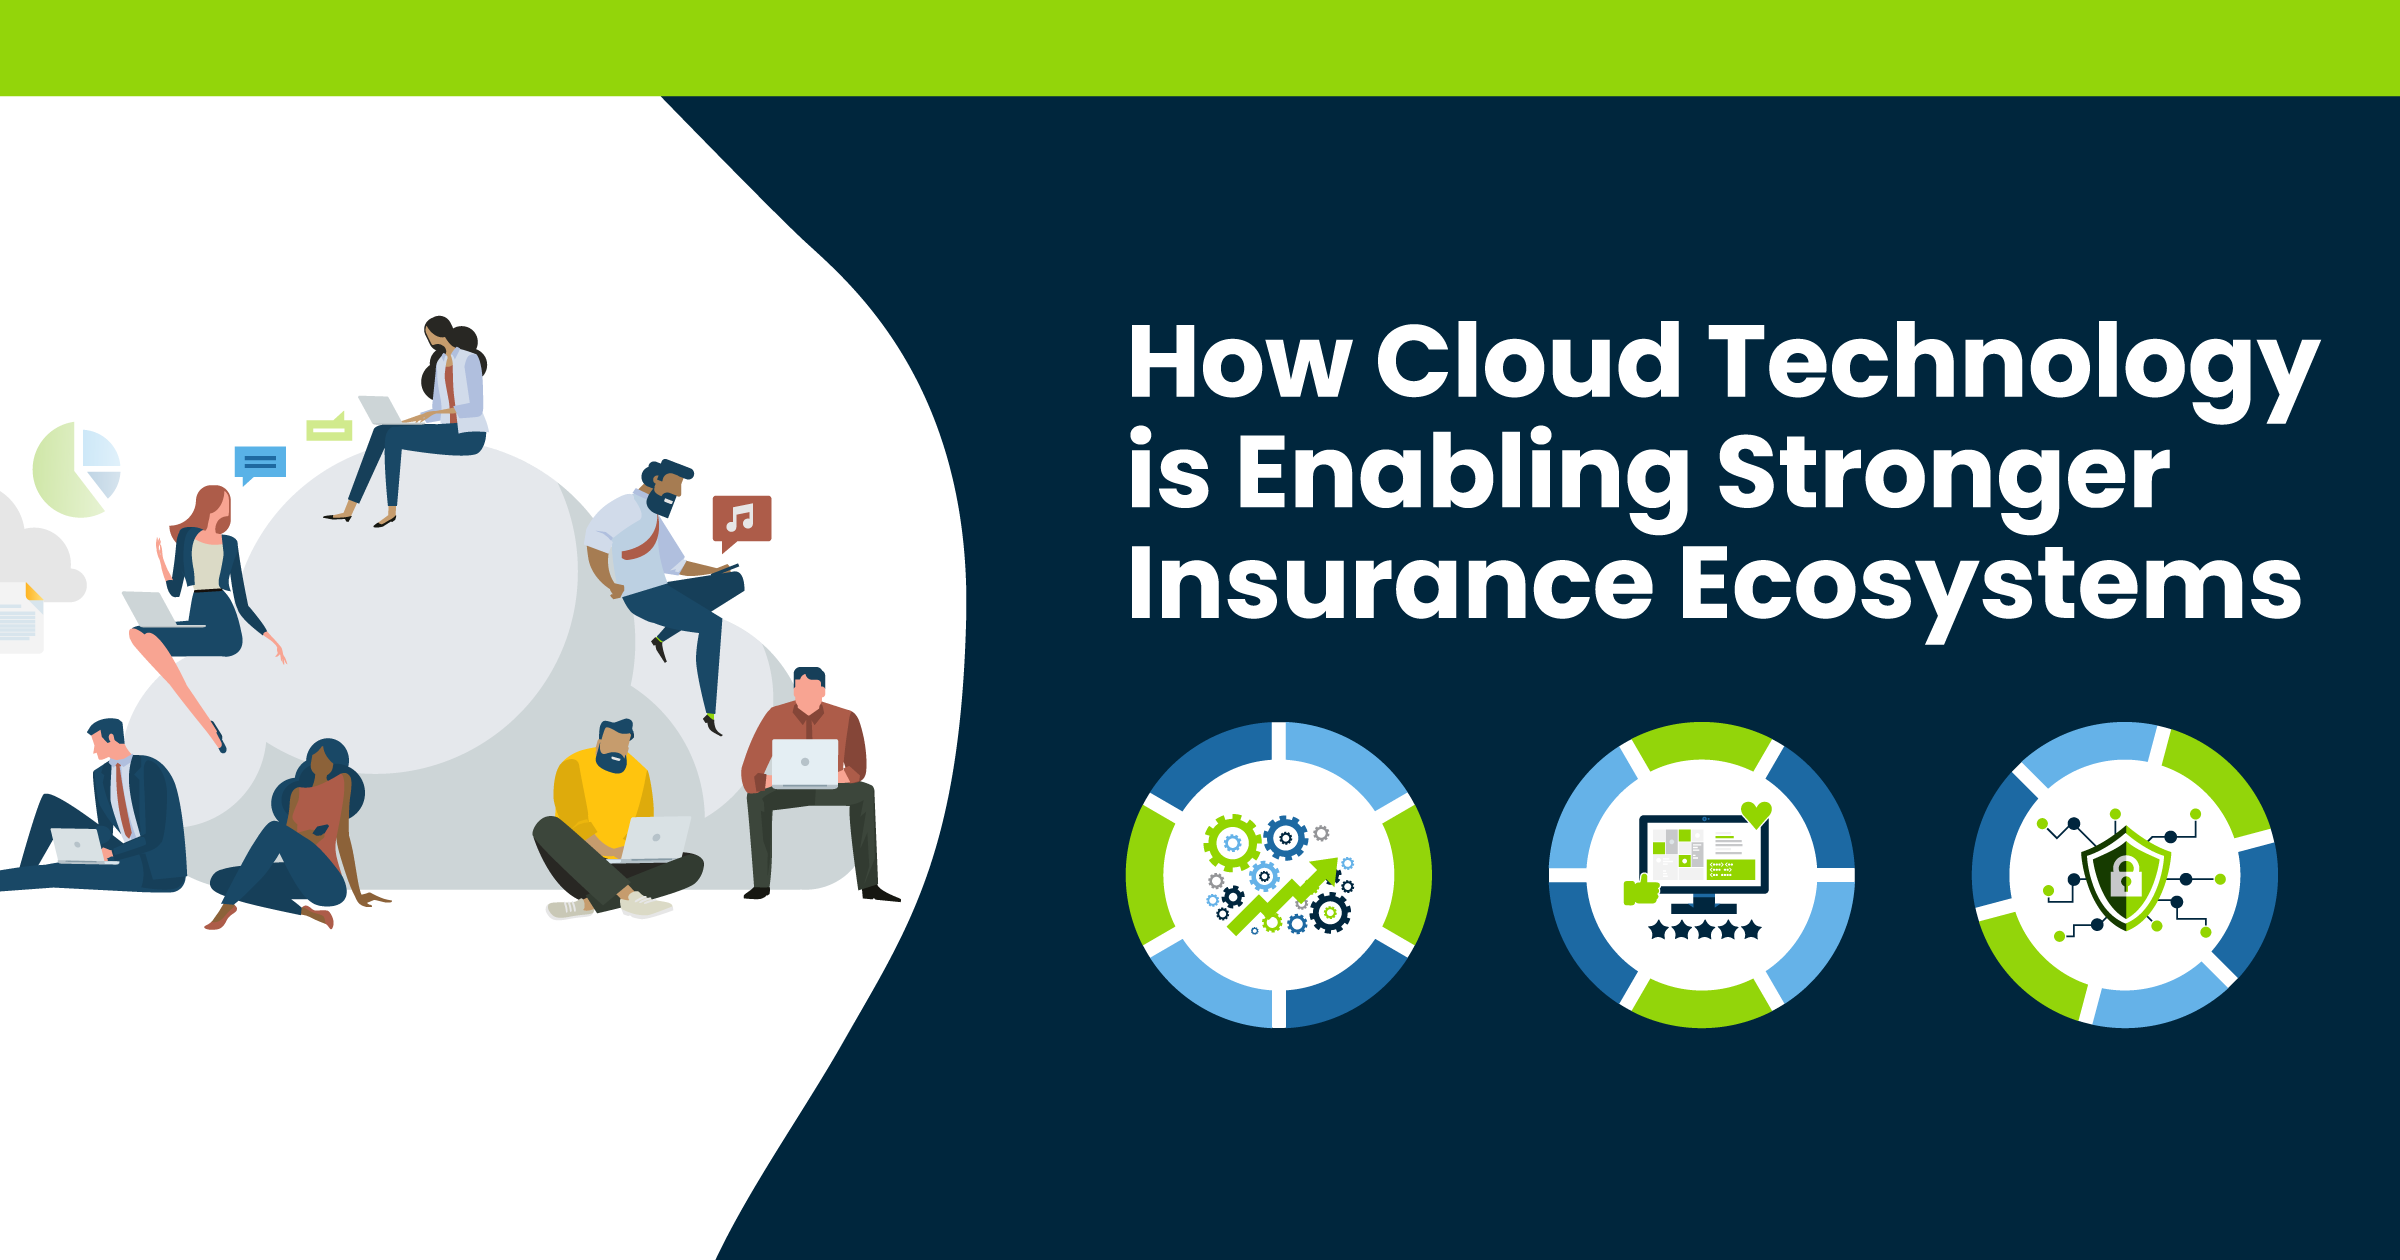 How Cloud Technology is Enabling Stronger Insurance Ecosystems Illustration